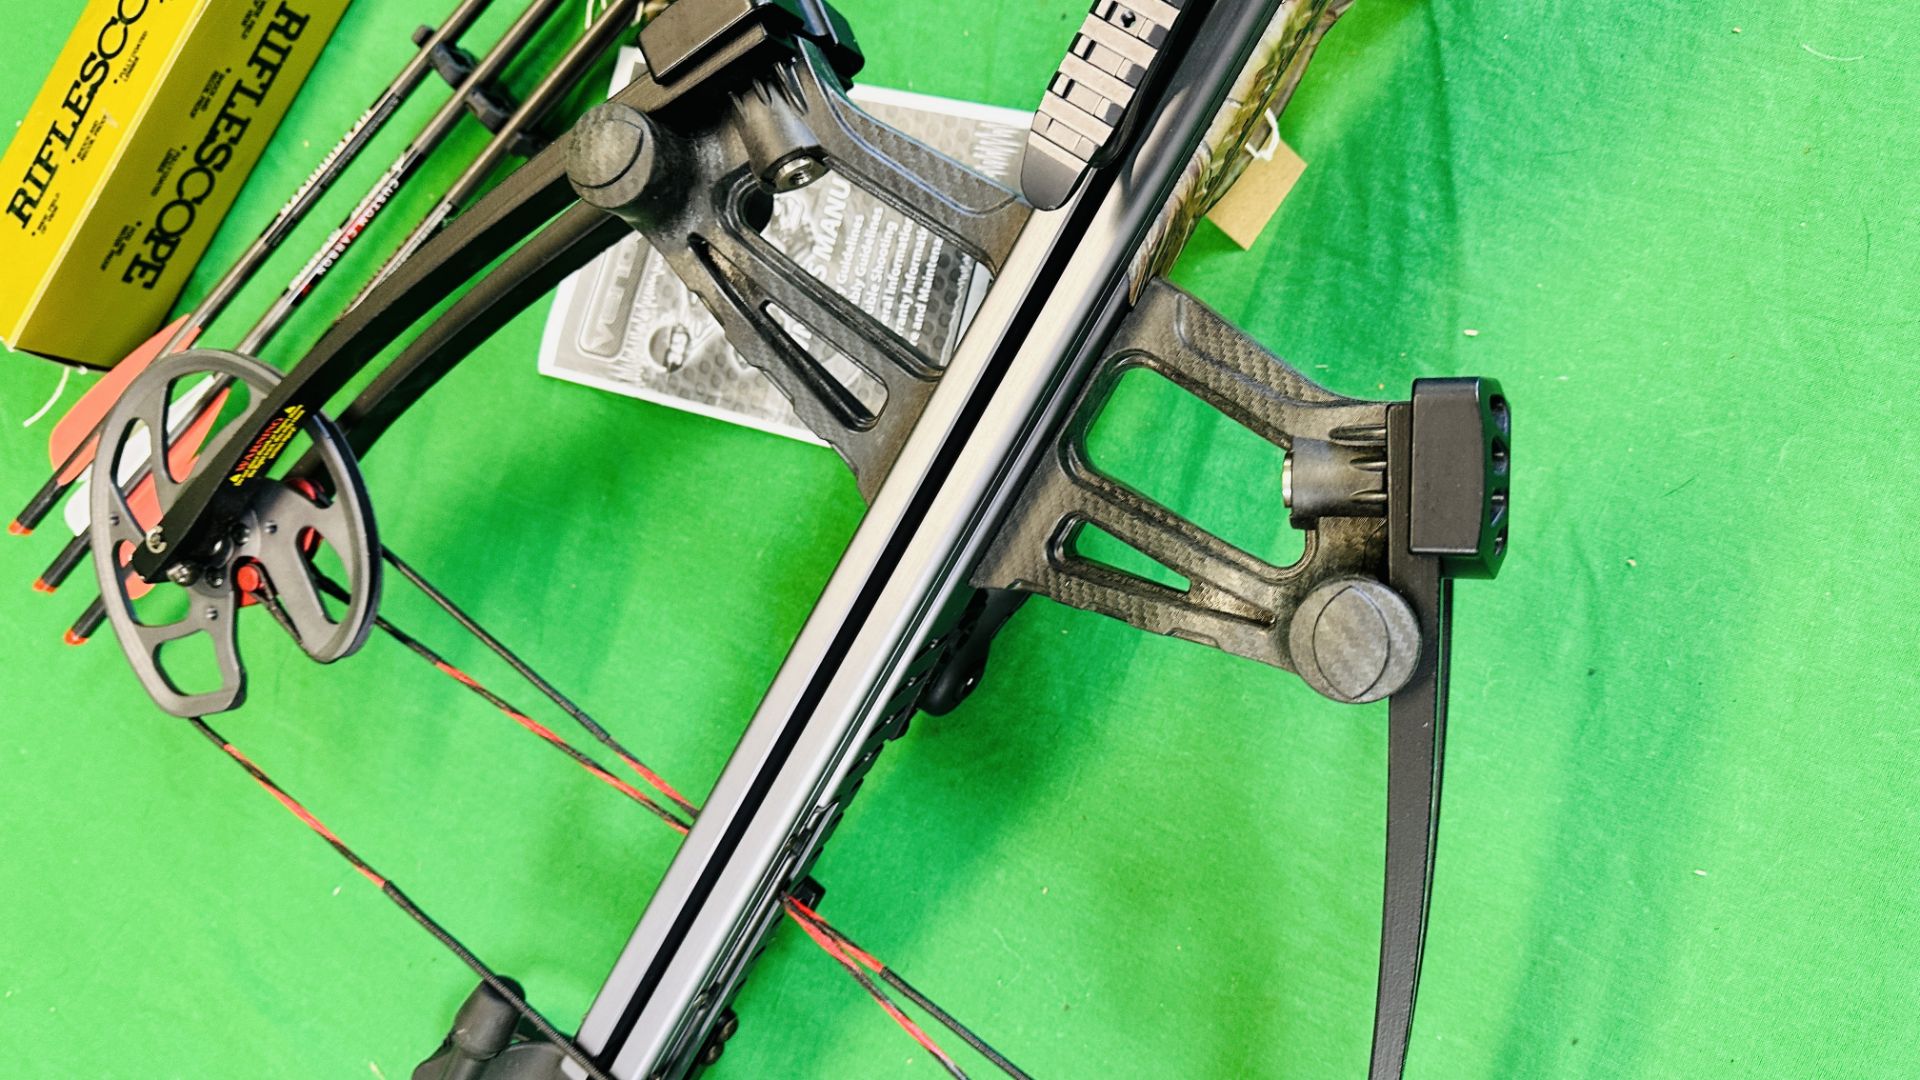 BARNETT "VENGANCE" COMPOUND CROSSBOW COMPLETE WITH THREE CARBON FIBRE CROSSBOW BOLTS, QUIVER, - Image 25 of 35